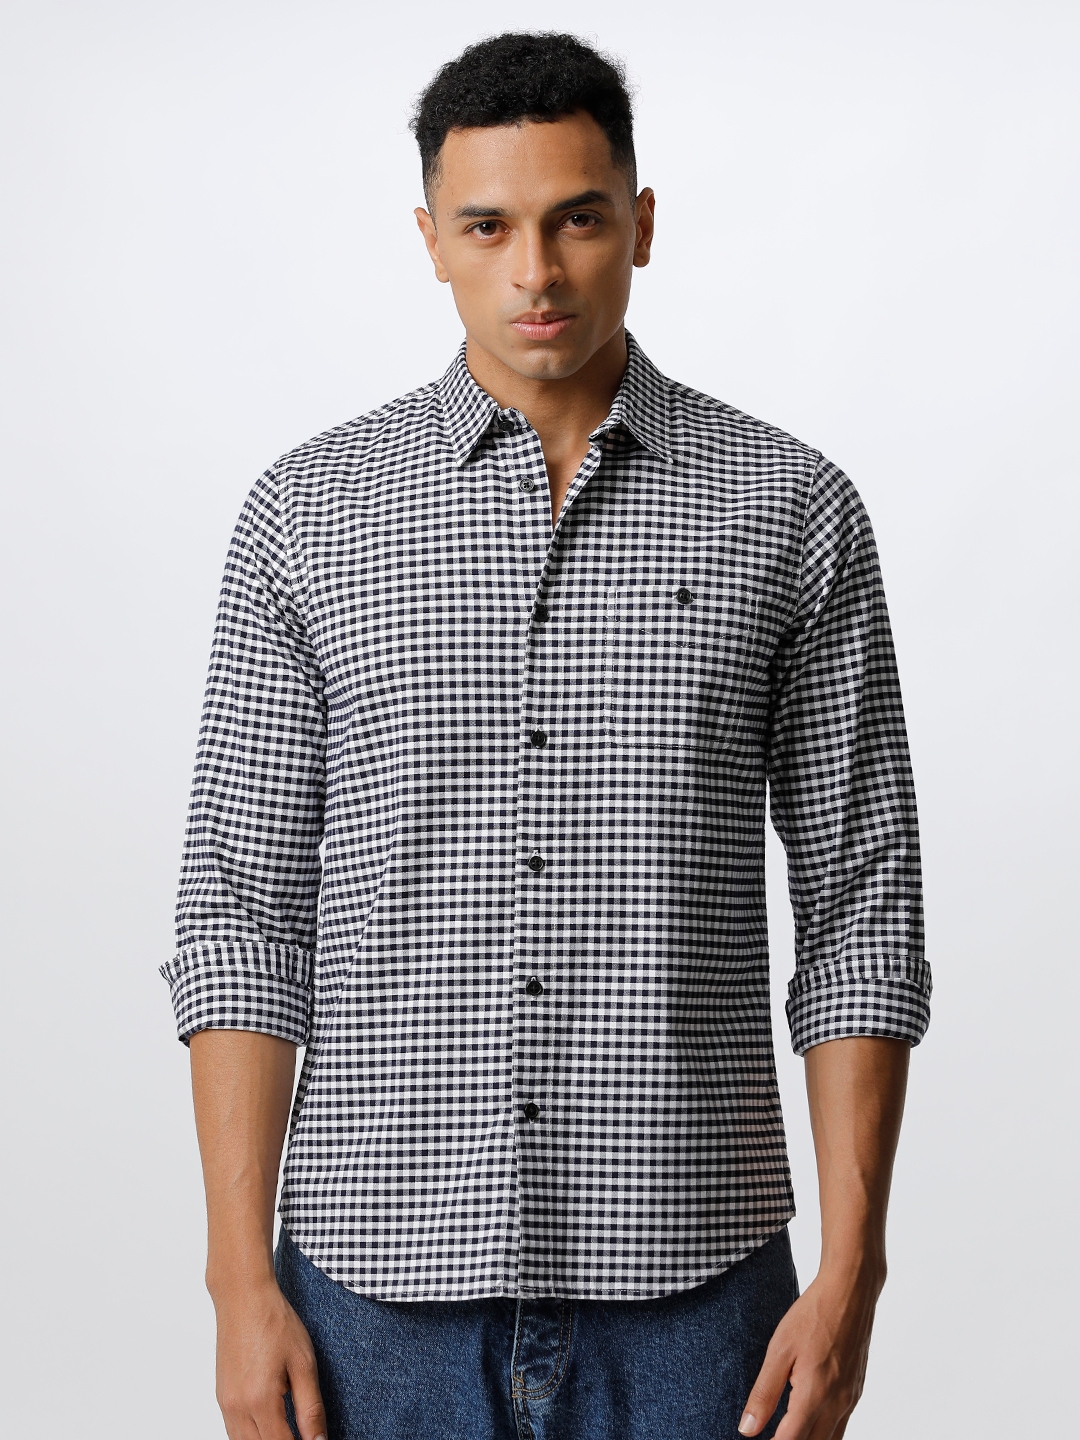 Men White & Black Gingham Checked Slim Fit Cotton Casual Shirt